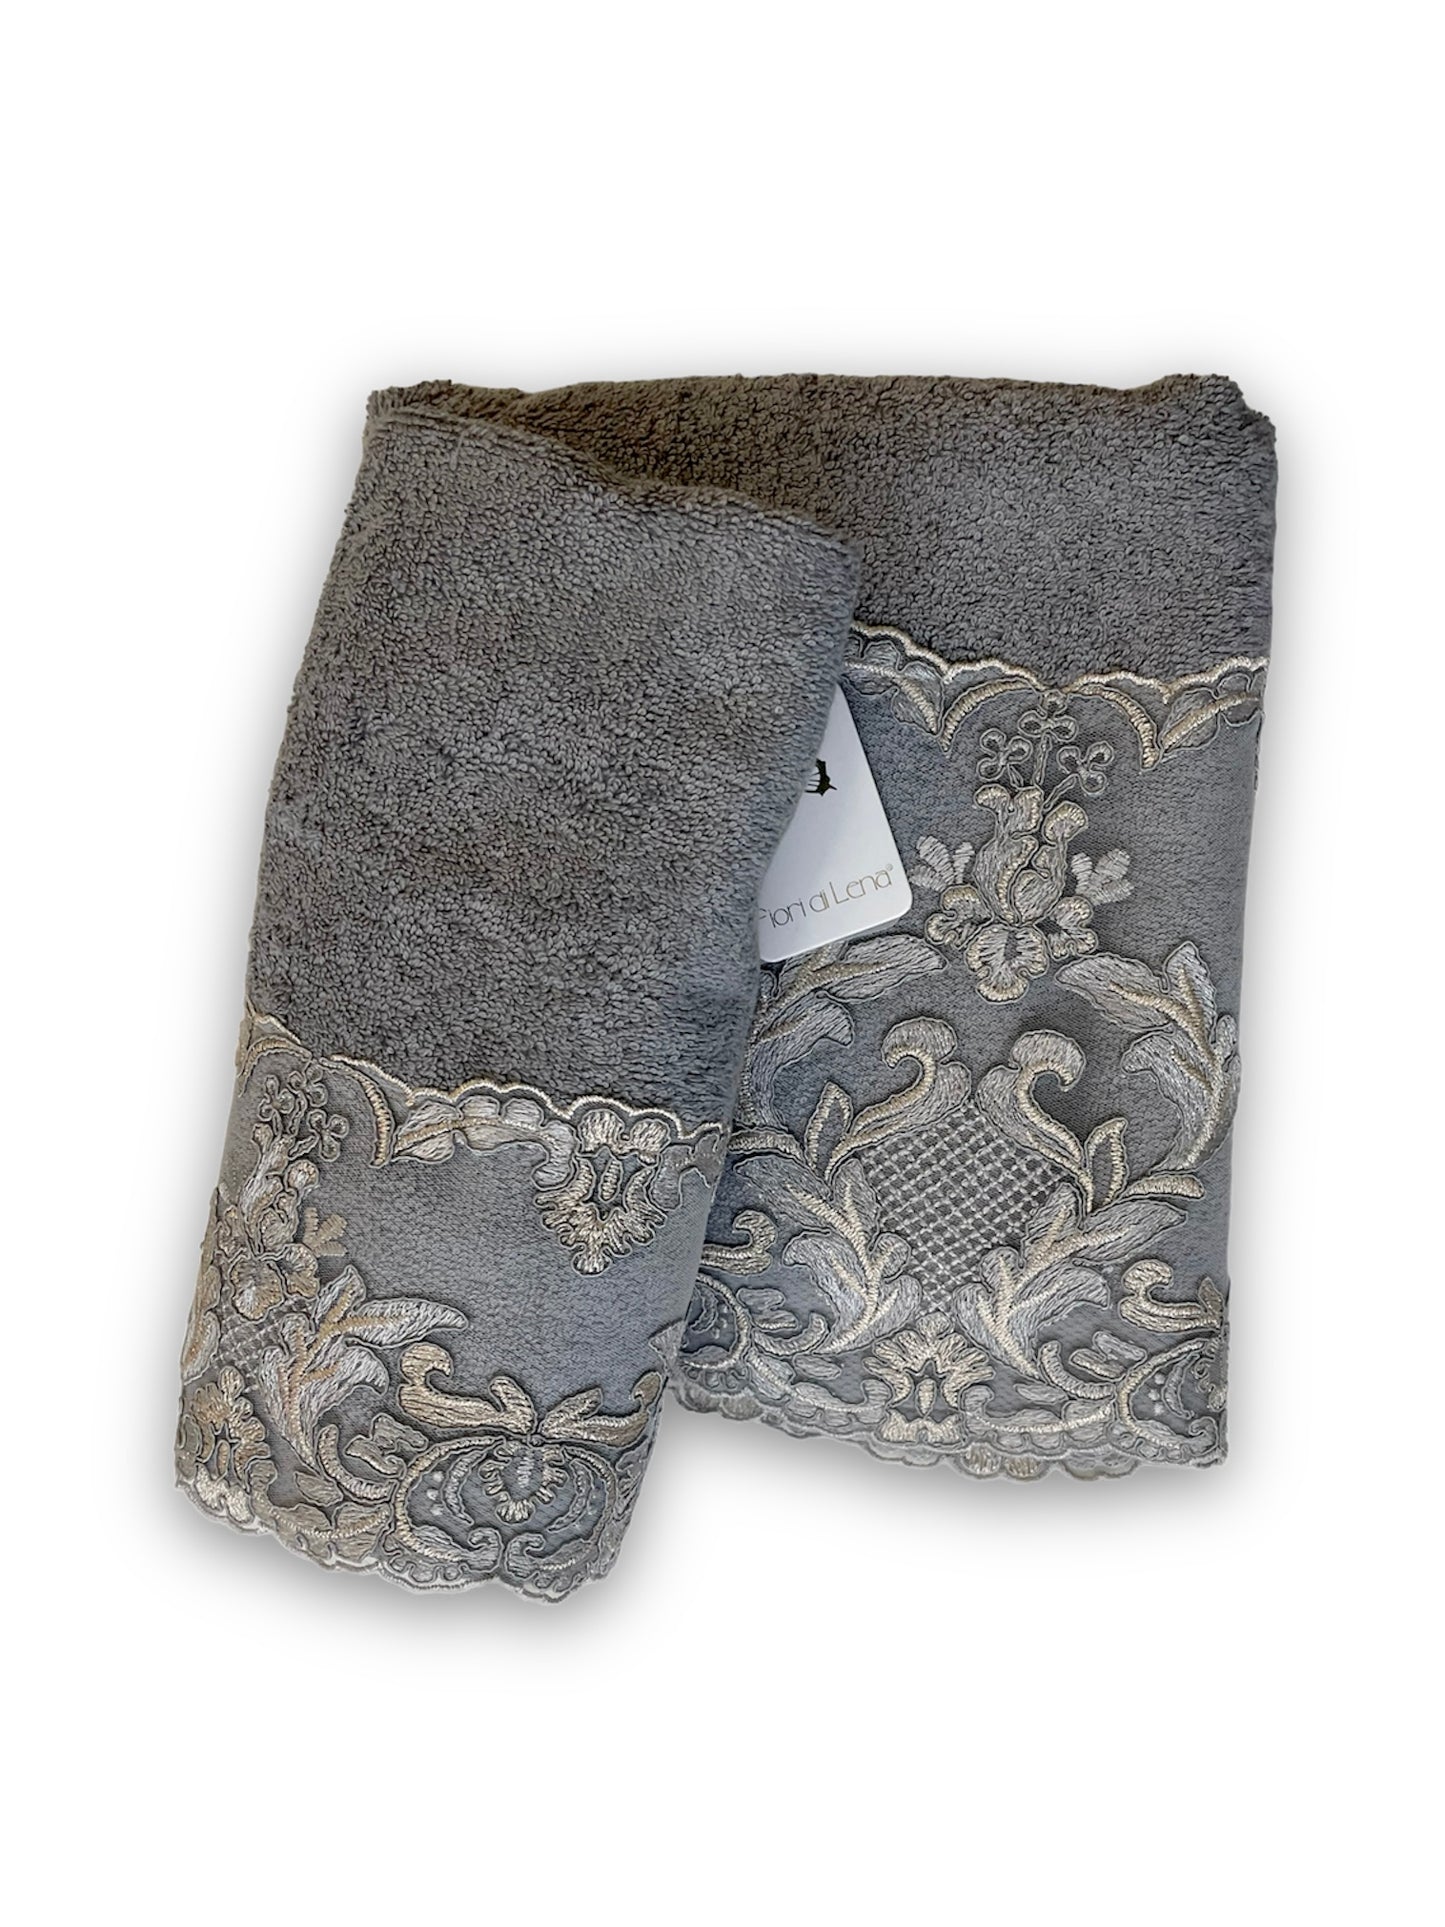 Pair of towels with gray lace Fiori di Lena